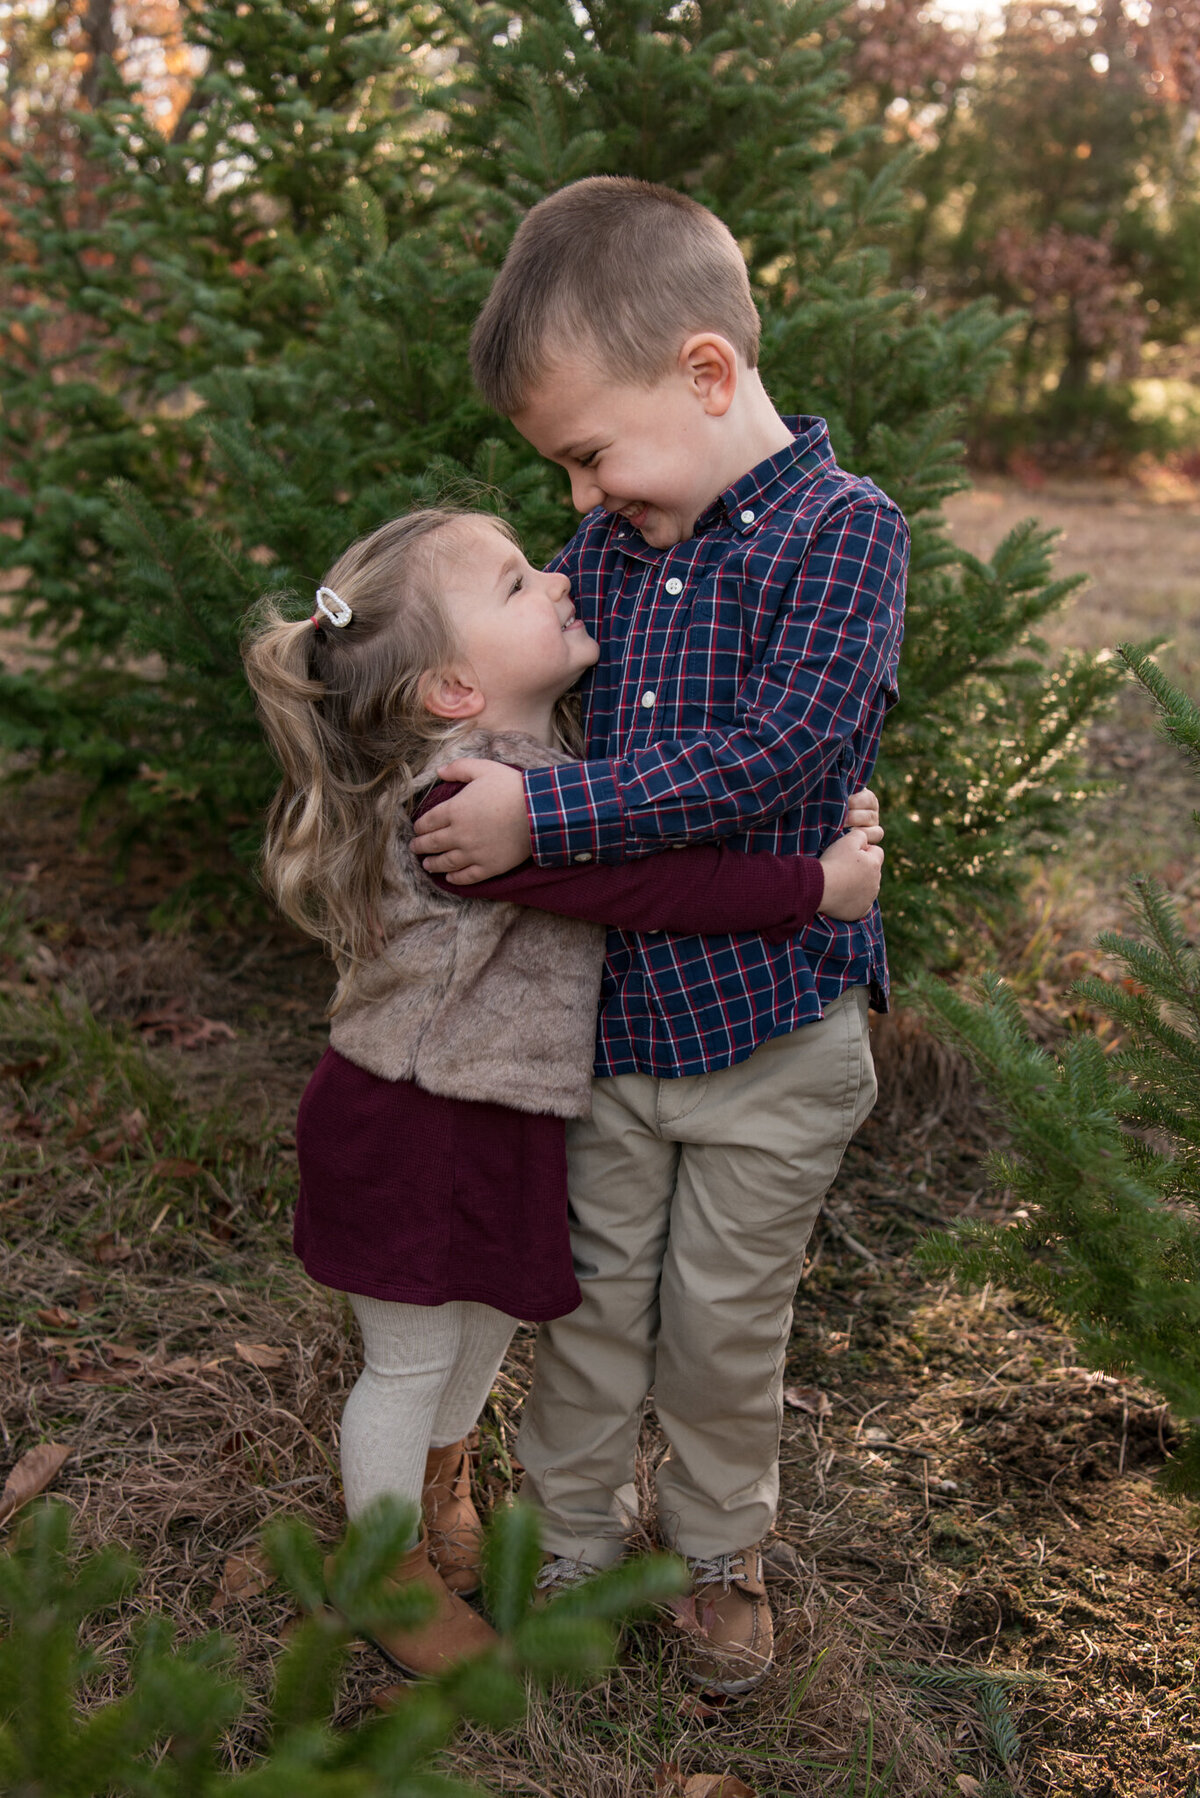 Brother and sister hugging and smiling at each other at Christmas Tree Farm